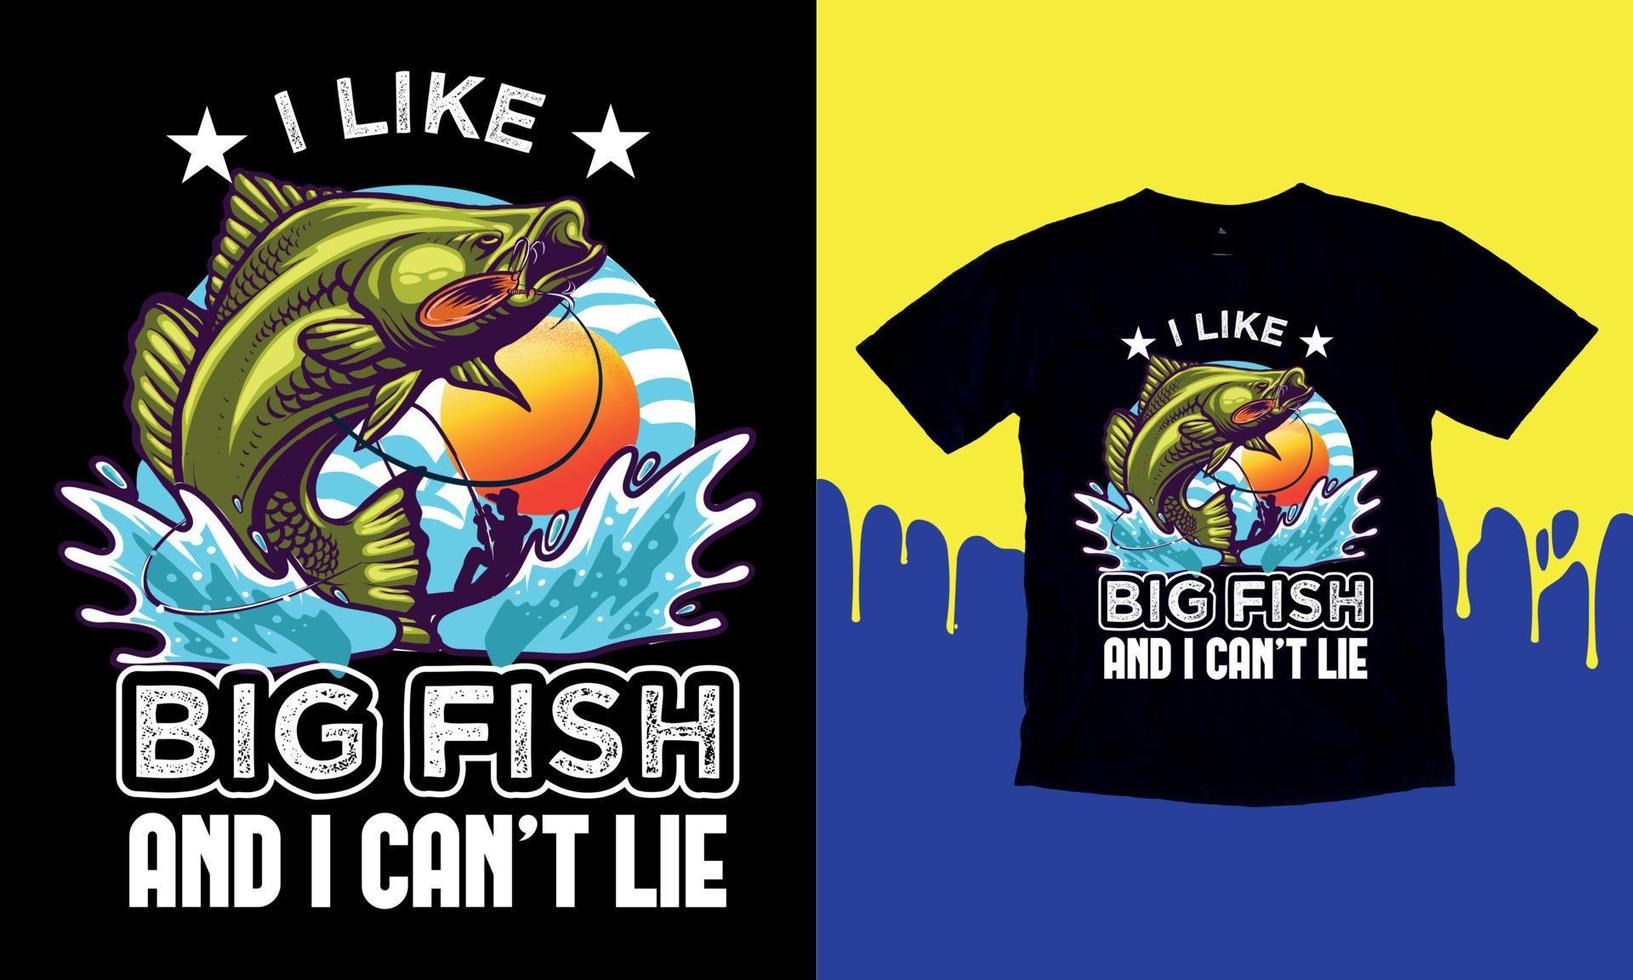 I Like Big Fish And I Can't Lie, T-Shirt Gift Men's Funny Fishing t shirts design, Vector graphic, typographic poster or t-shirt.